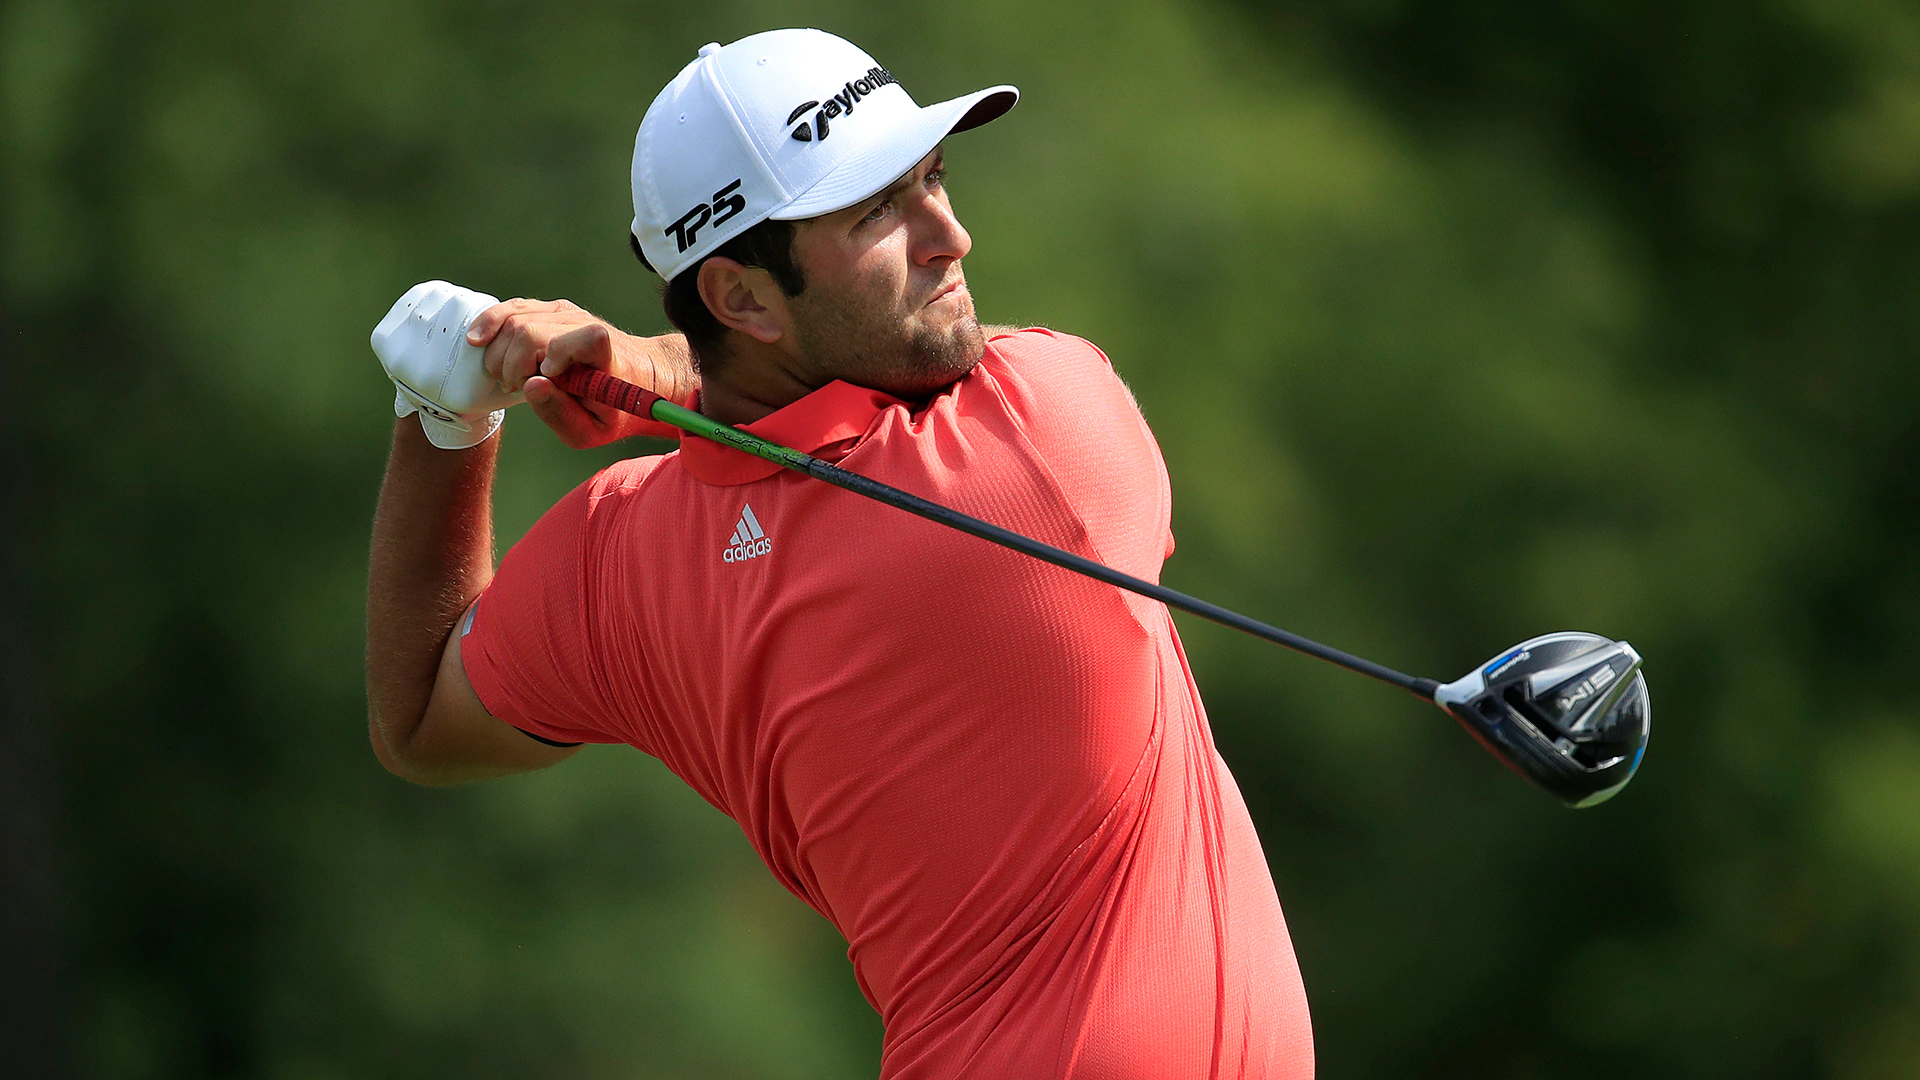 Who is Player of the Year? Jon Rahm says it comes down to East Lake